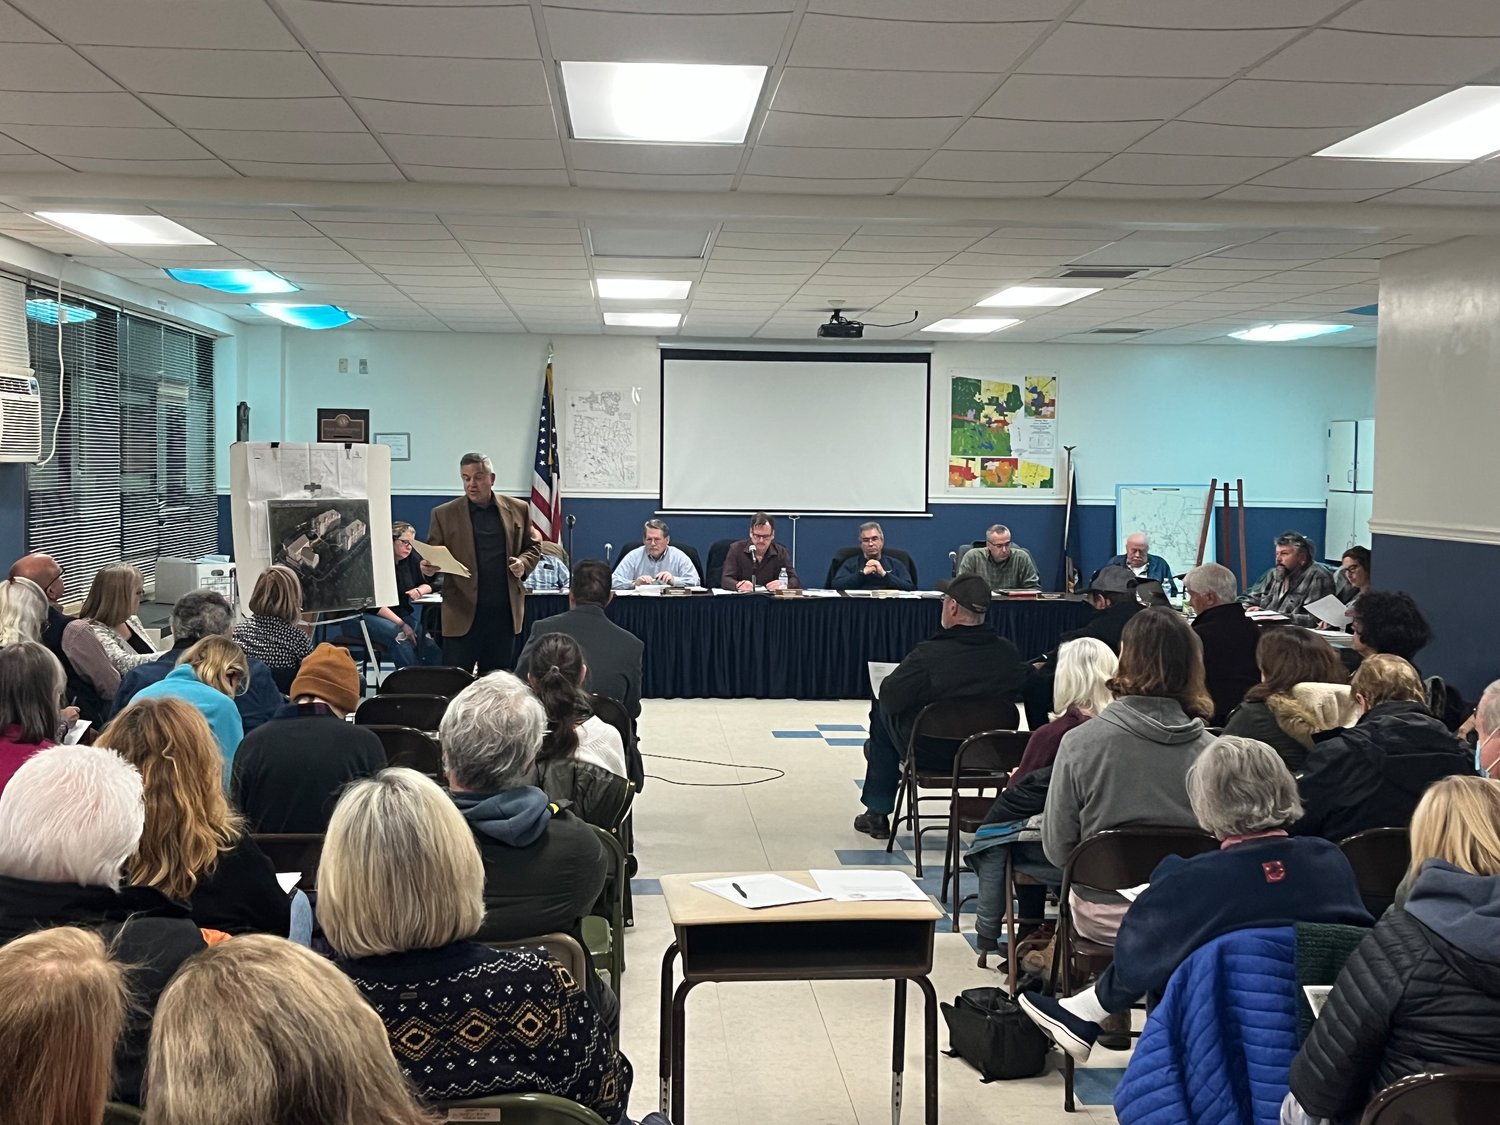 Concerned residents filled the Town of Bethel Planning Board meeting for a recent public hearing regarding a new hotel proposed for the site of the White Lake Mansion House.